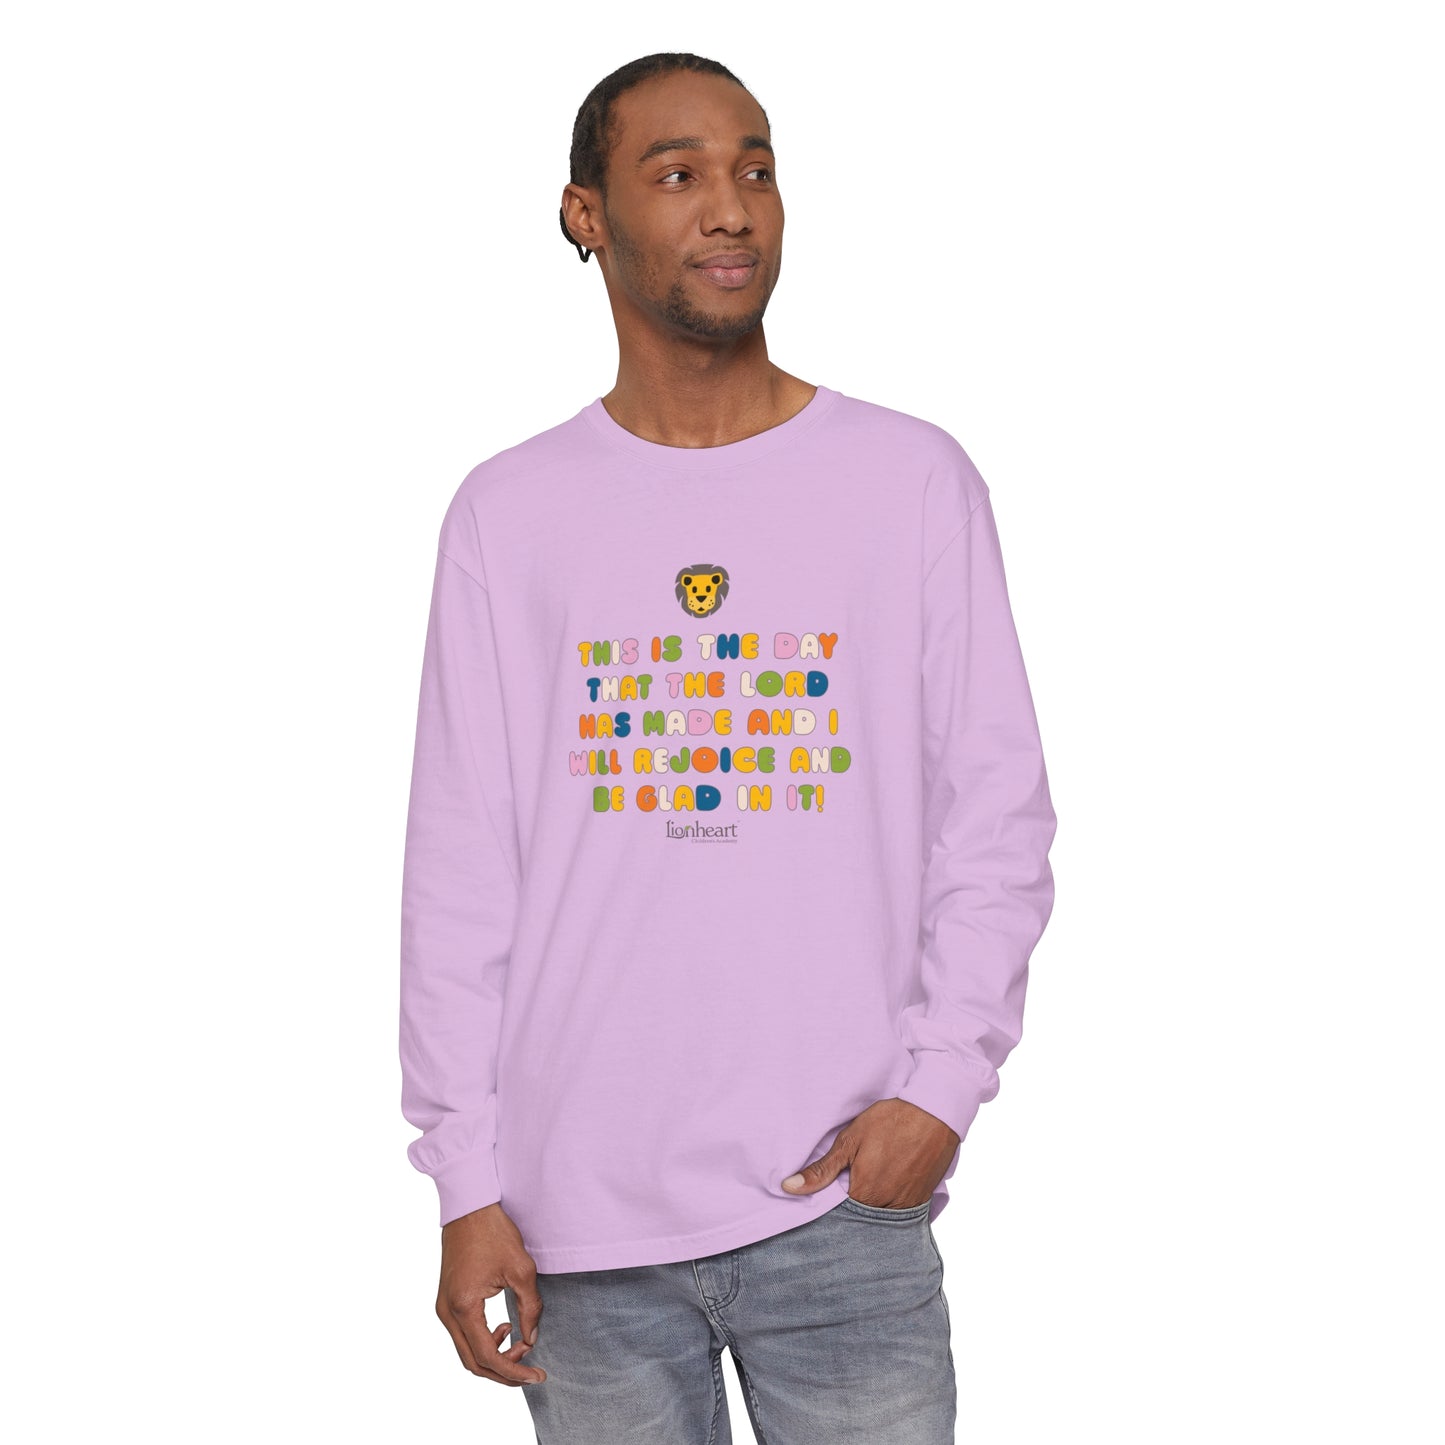 "This is the Day" Unisex Long Sleeve T-Shirt